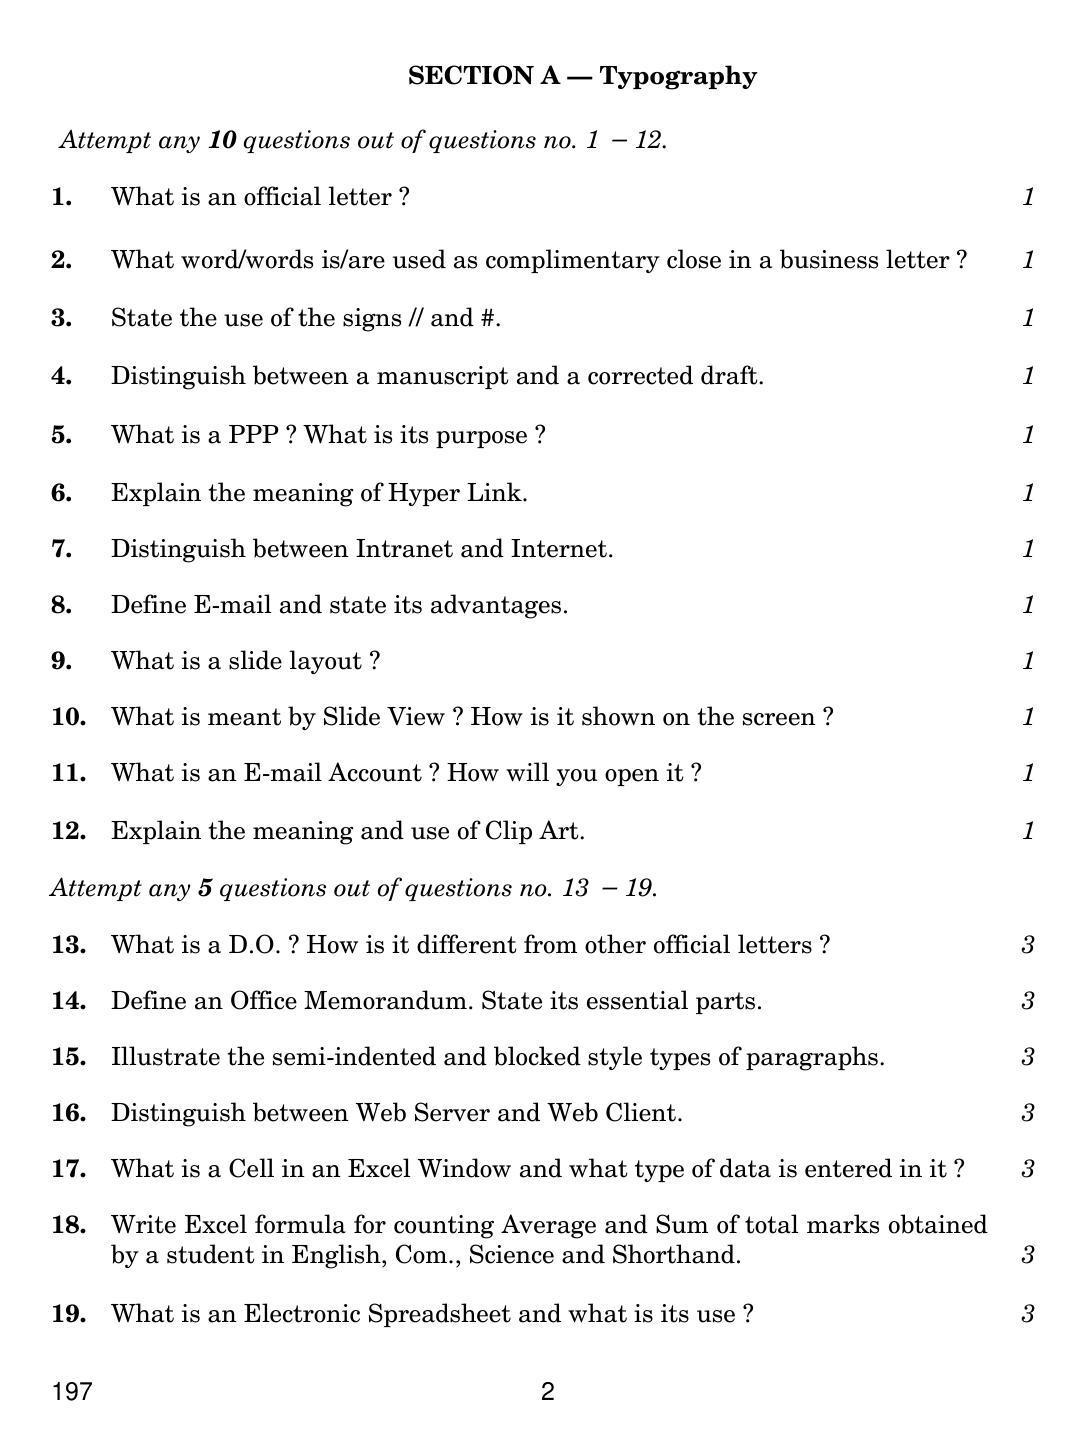 CBSE Class 12 197 Typography & Computer Applications (English) 2019 Question Paper - Page 2